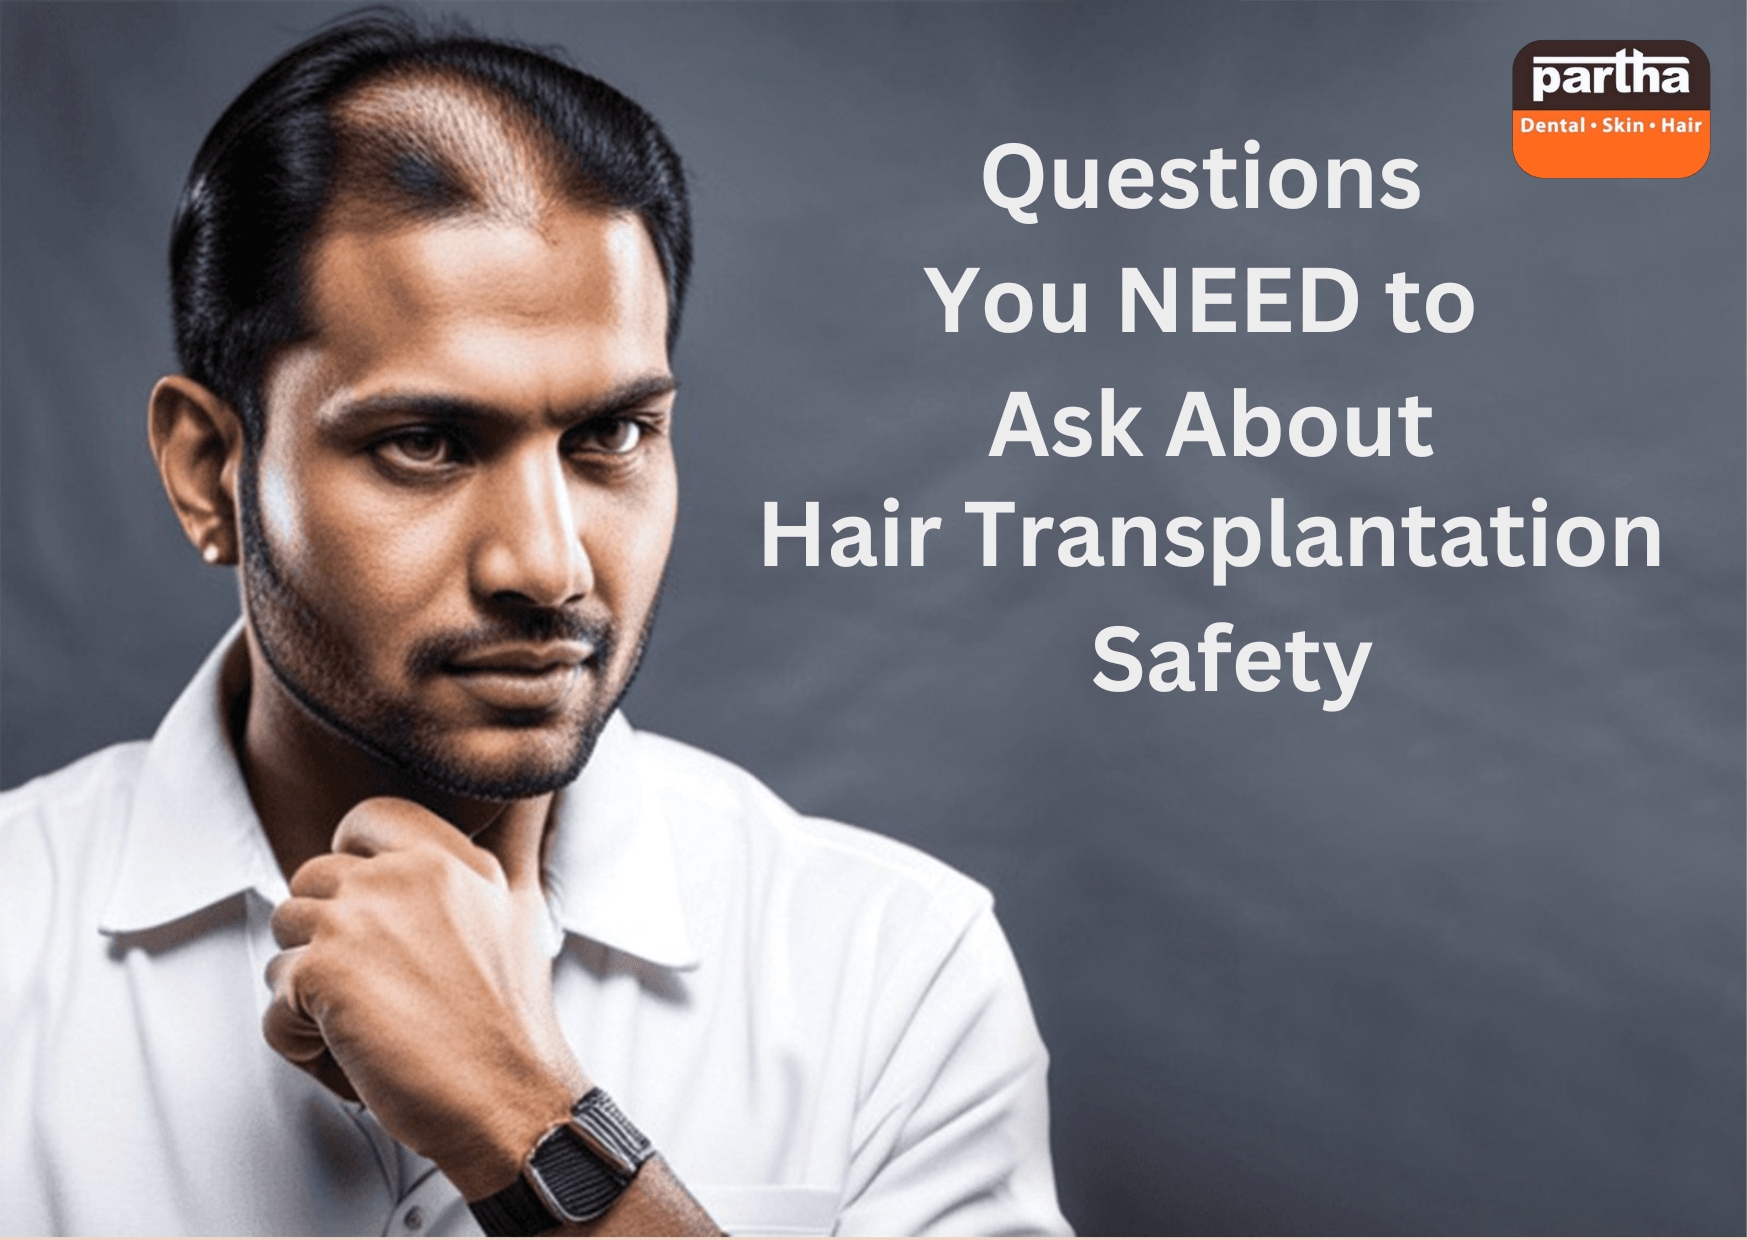 Top 5 Questions You Need To Ask About Hair Transplantation